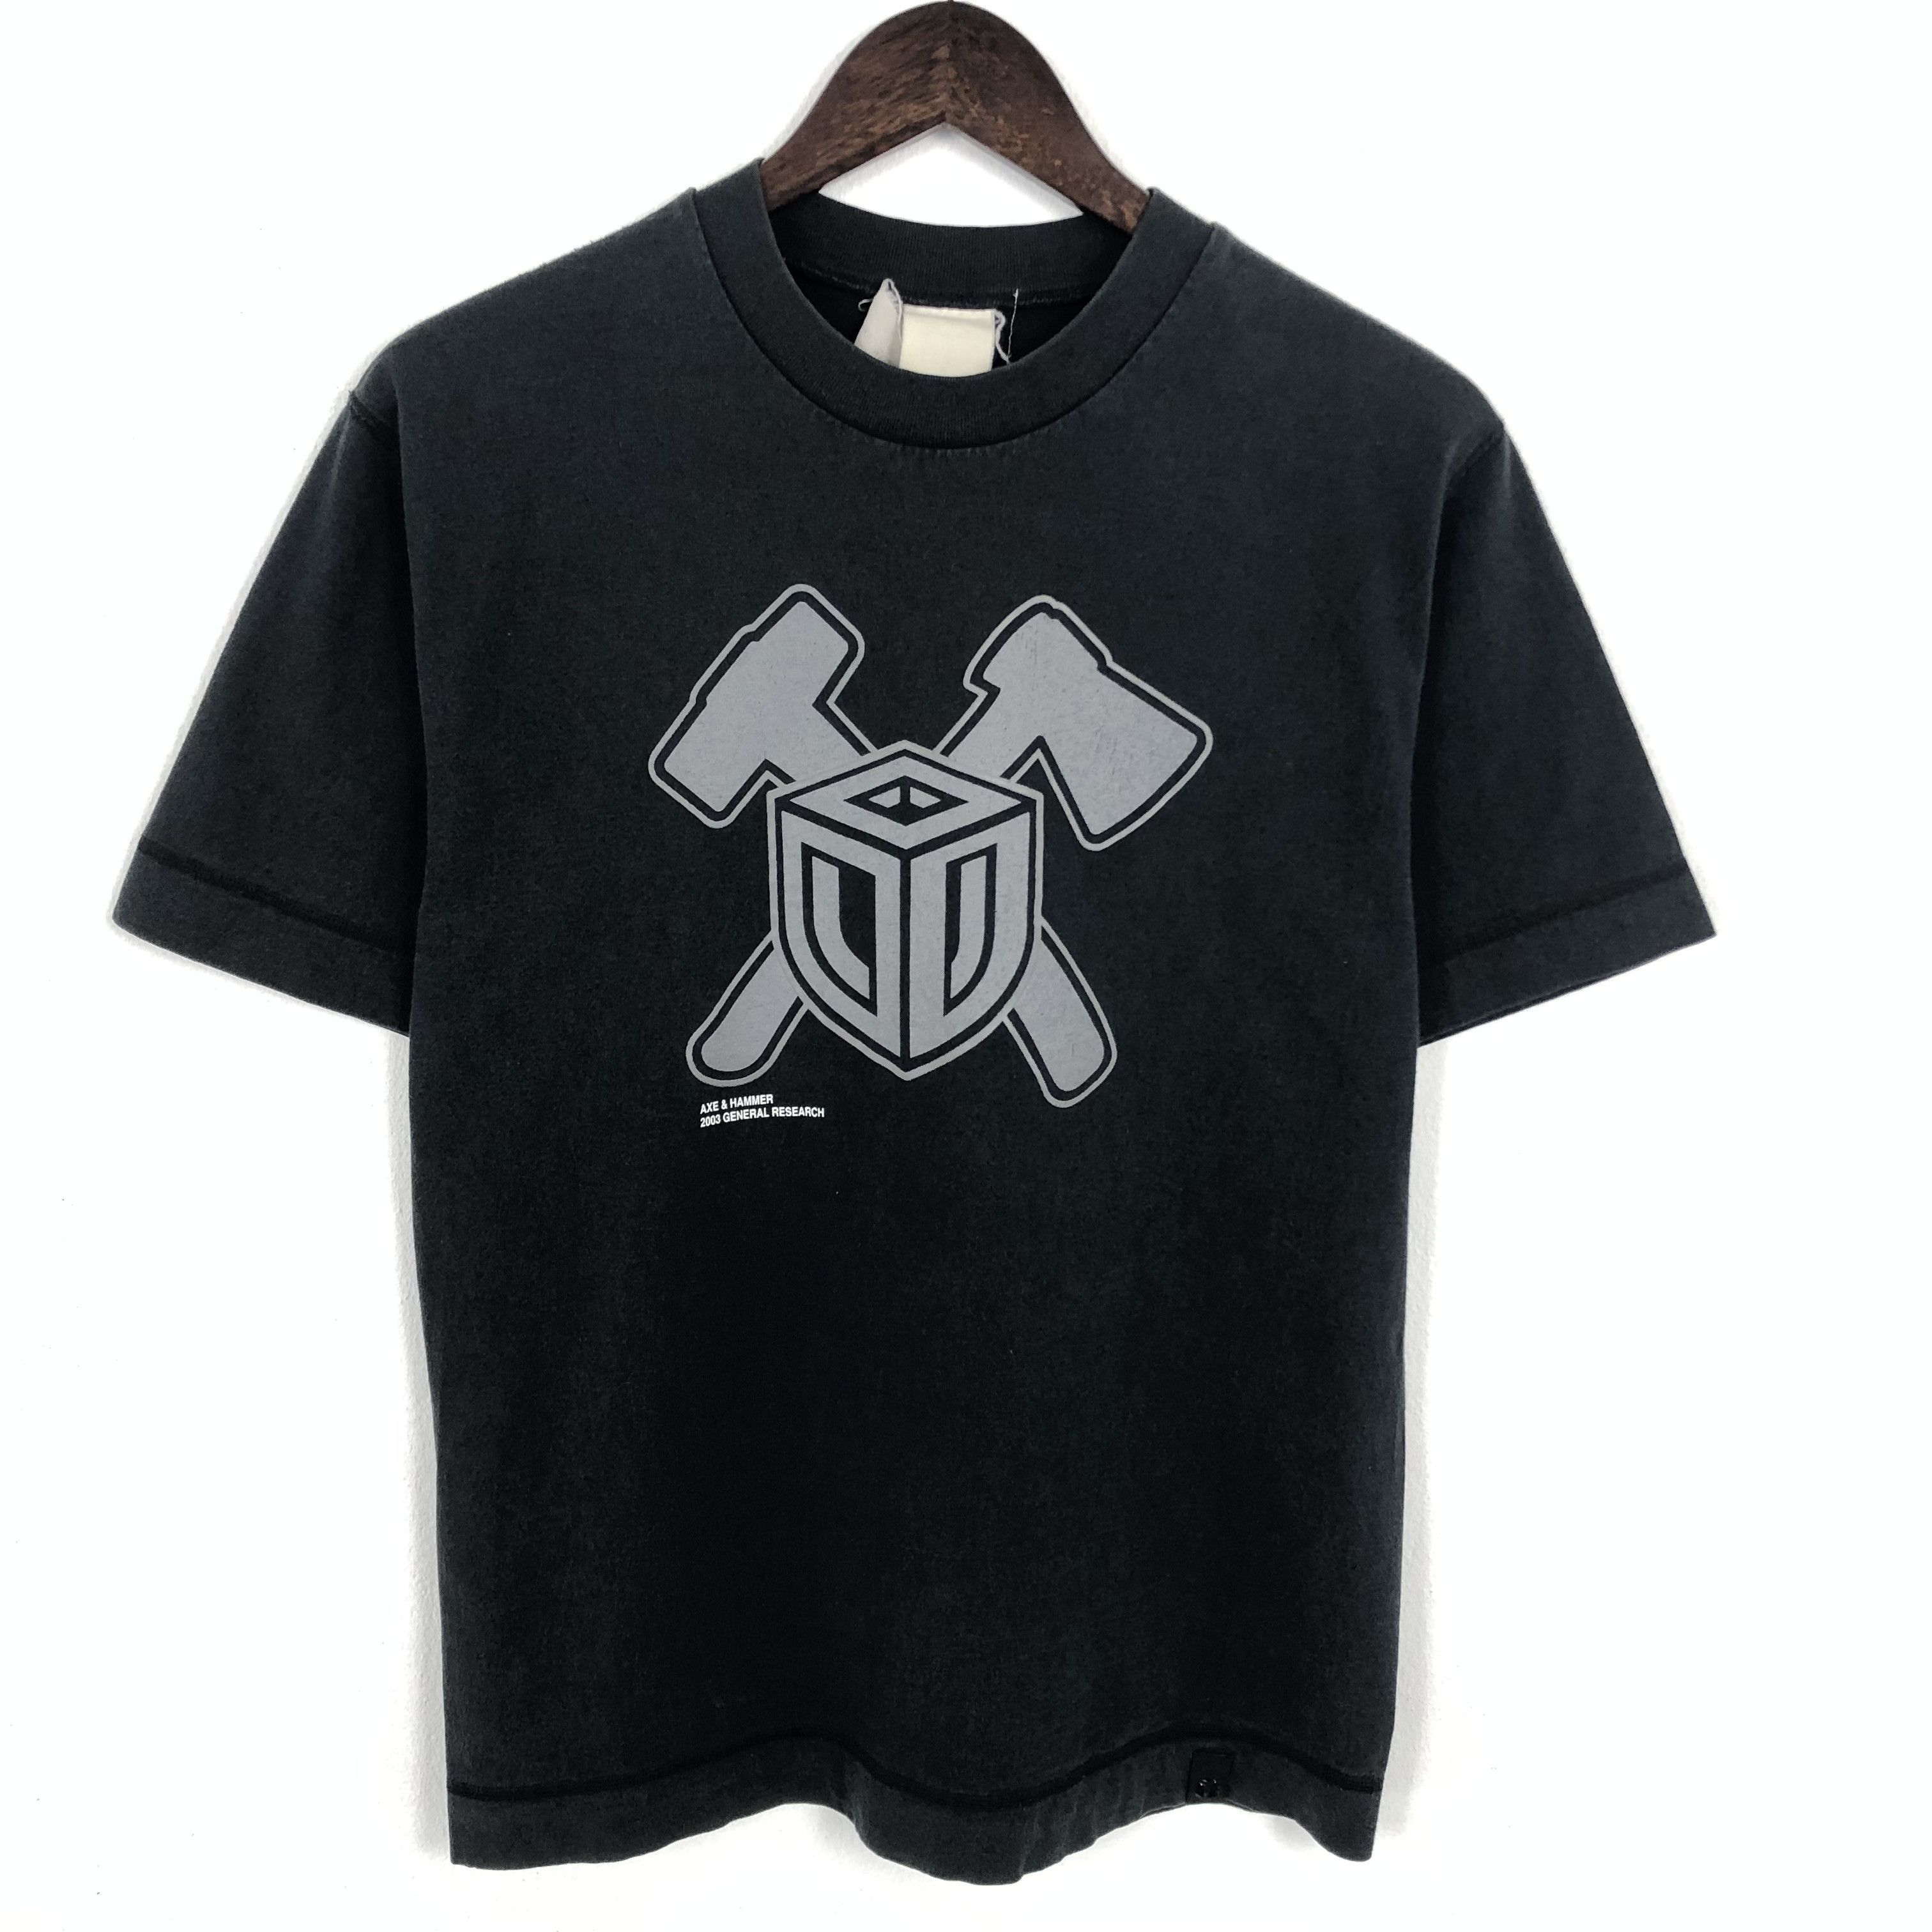 General Research Vintage General Research Nice Design T-shirt Size US S / EU 44-46 / 1 - 1 Preview